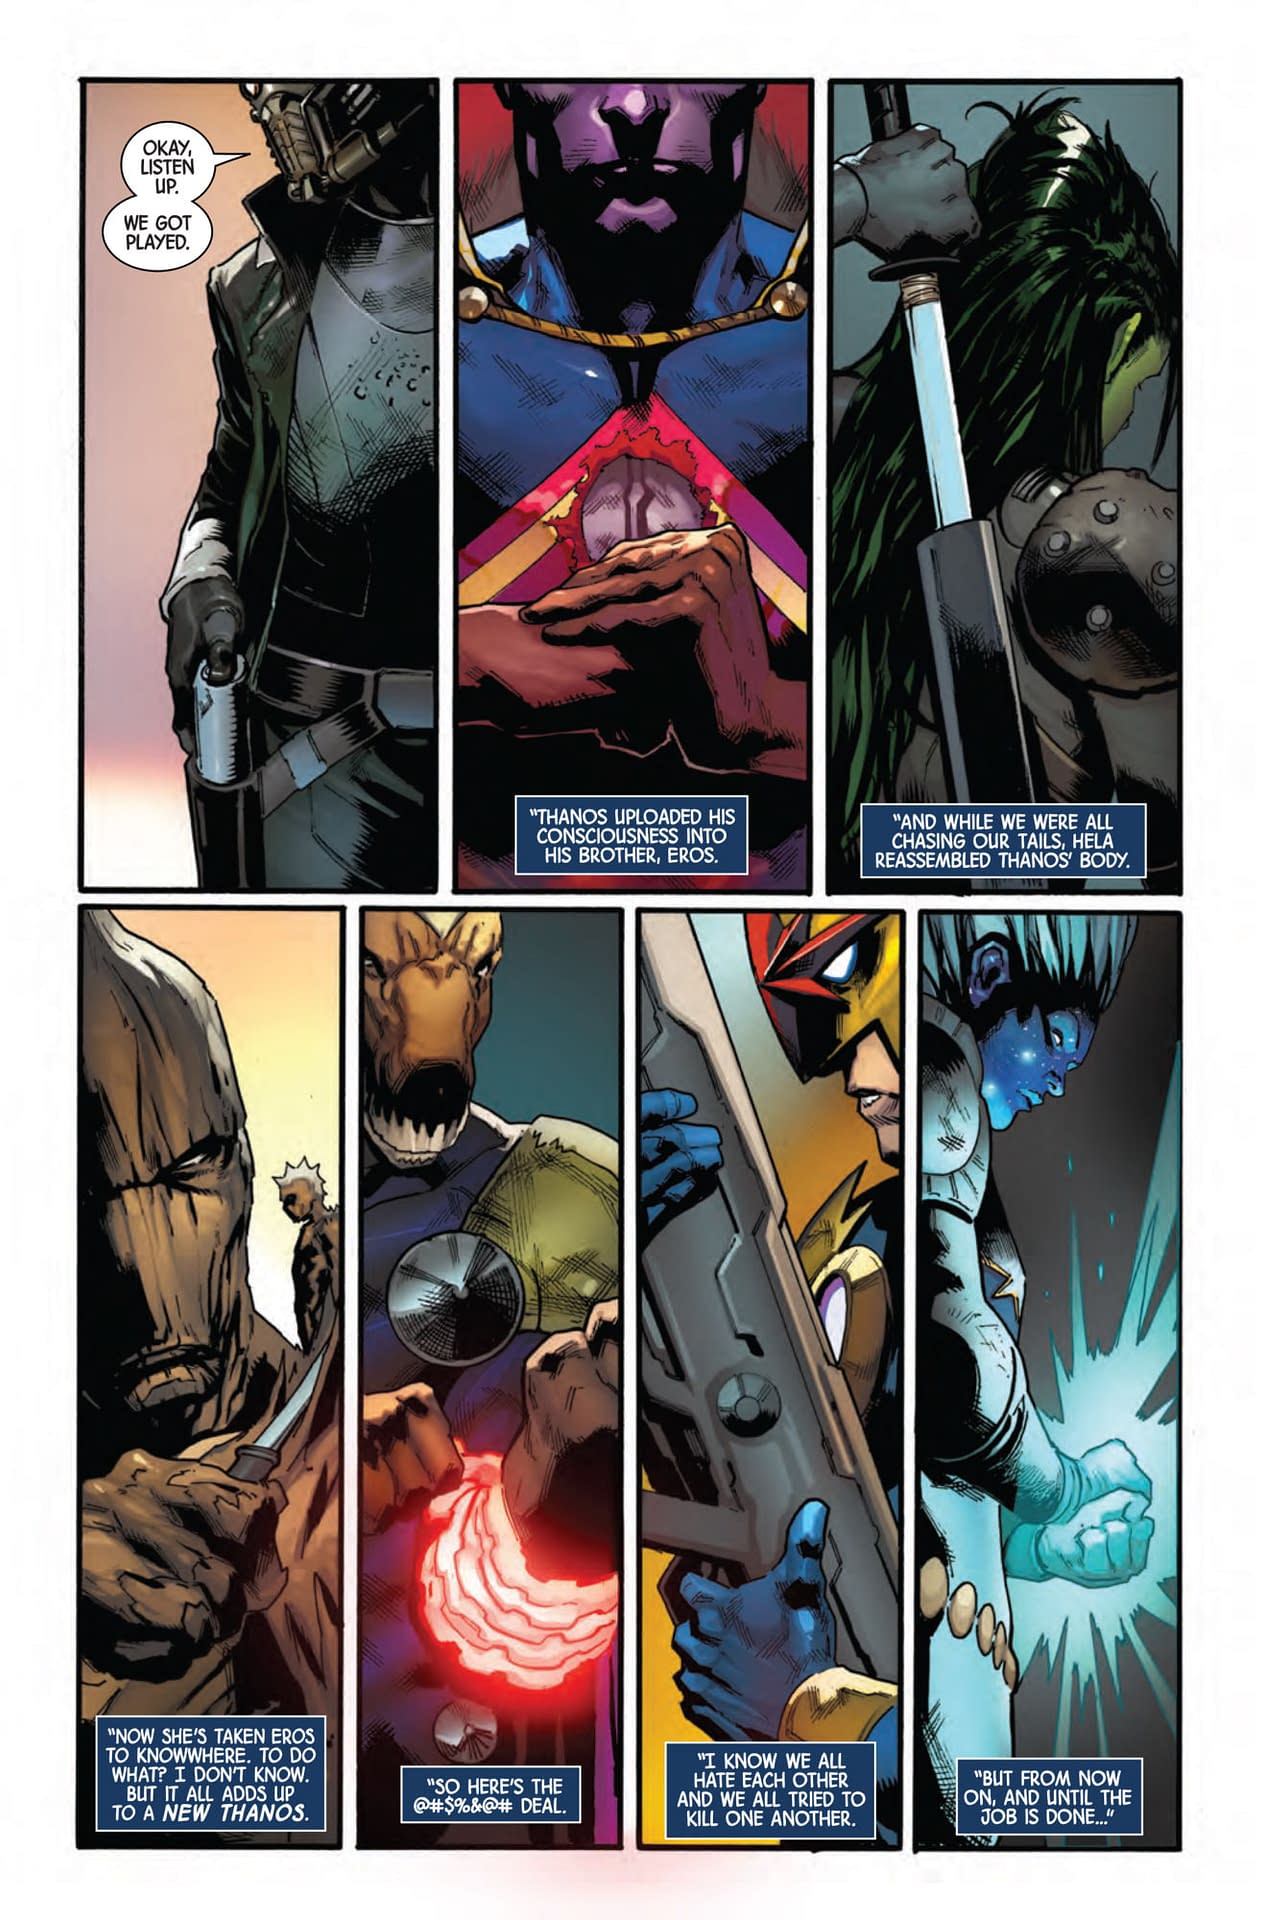 A New Guardians Team Already?! Guardians of the Galaxy #6 Preview